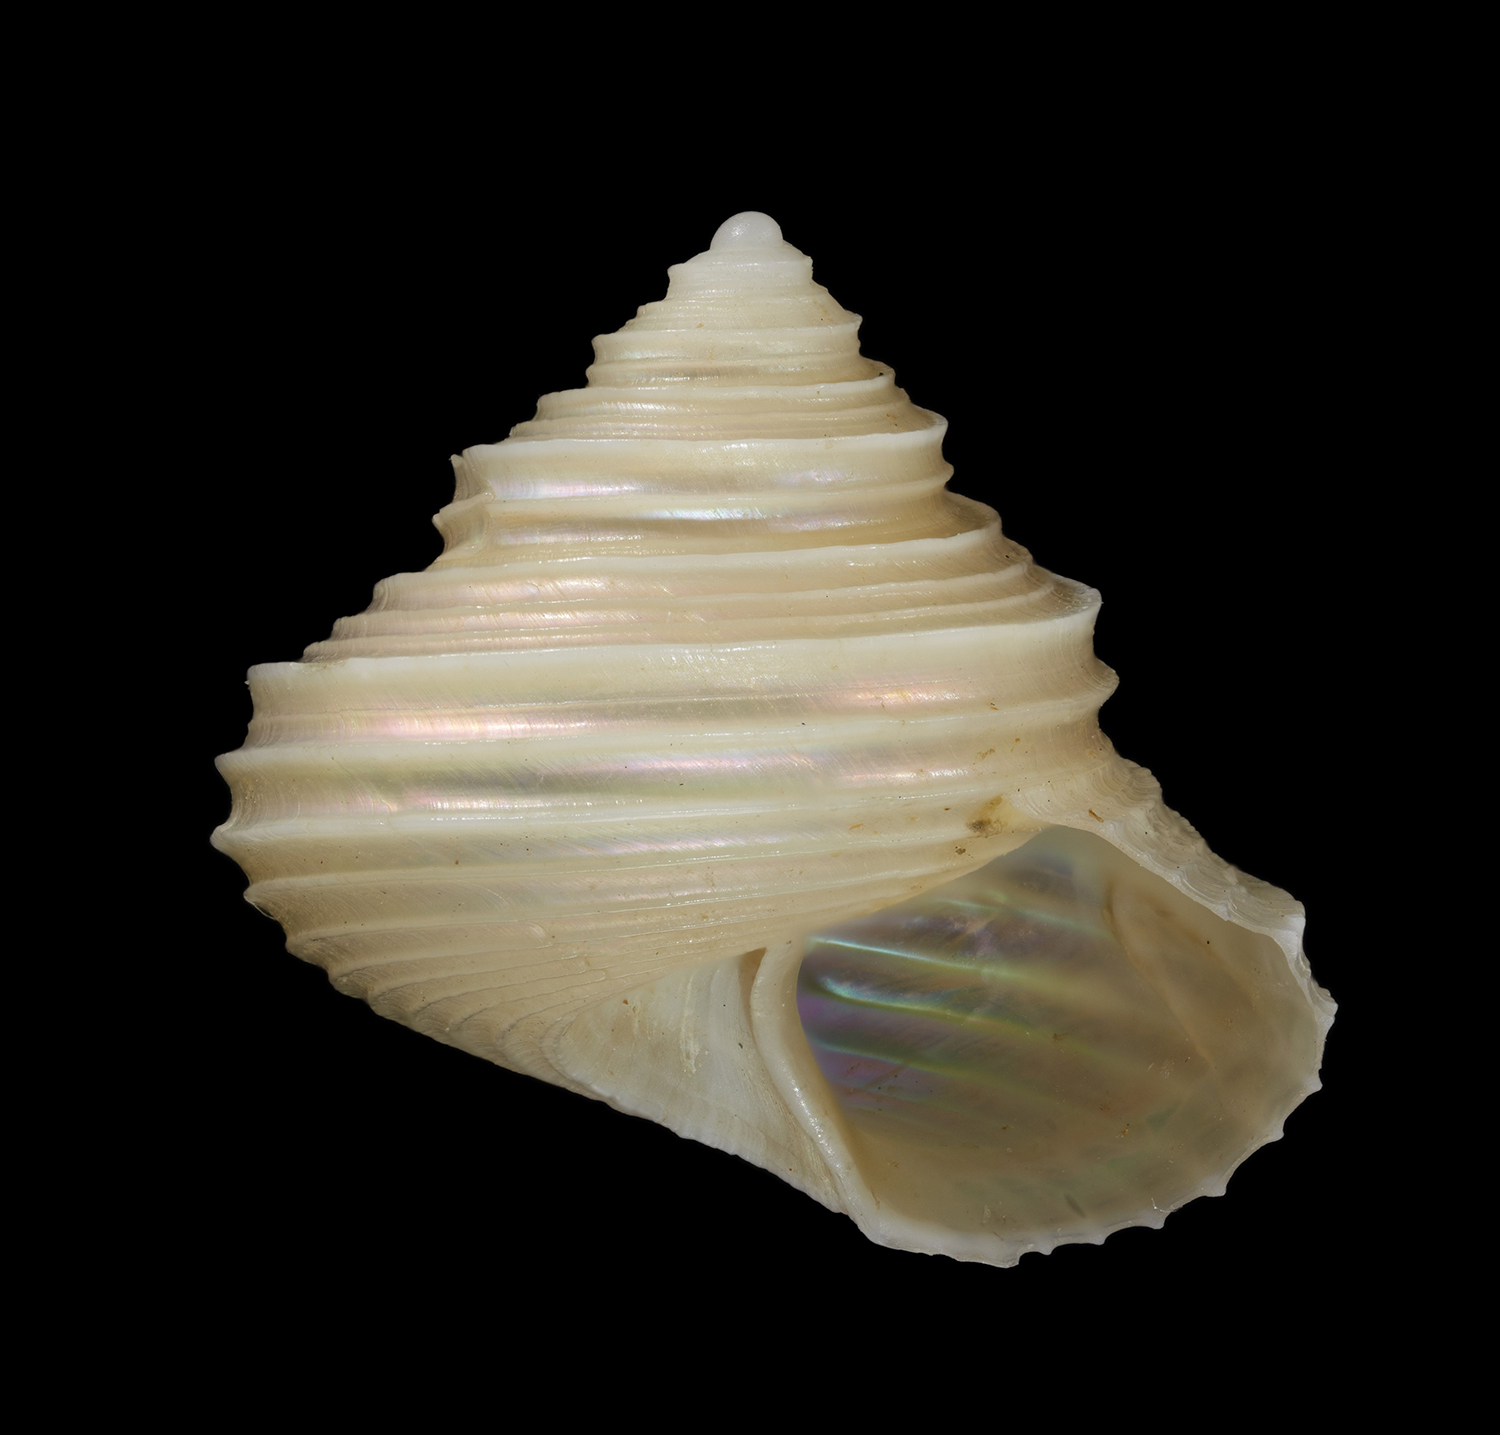 An iridescent shell on a black background.